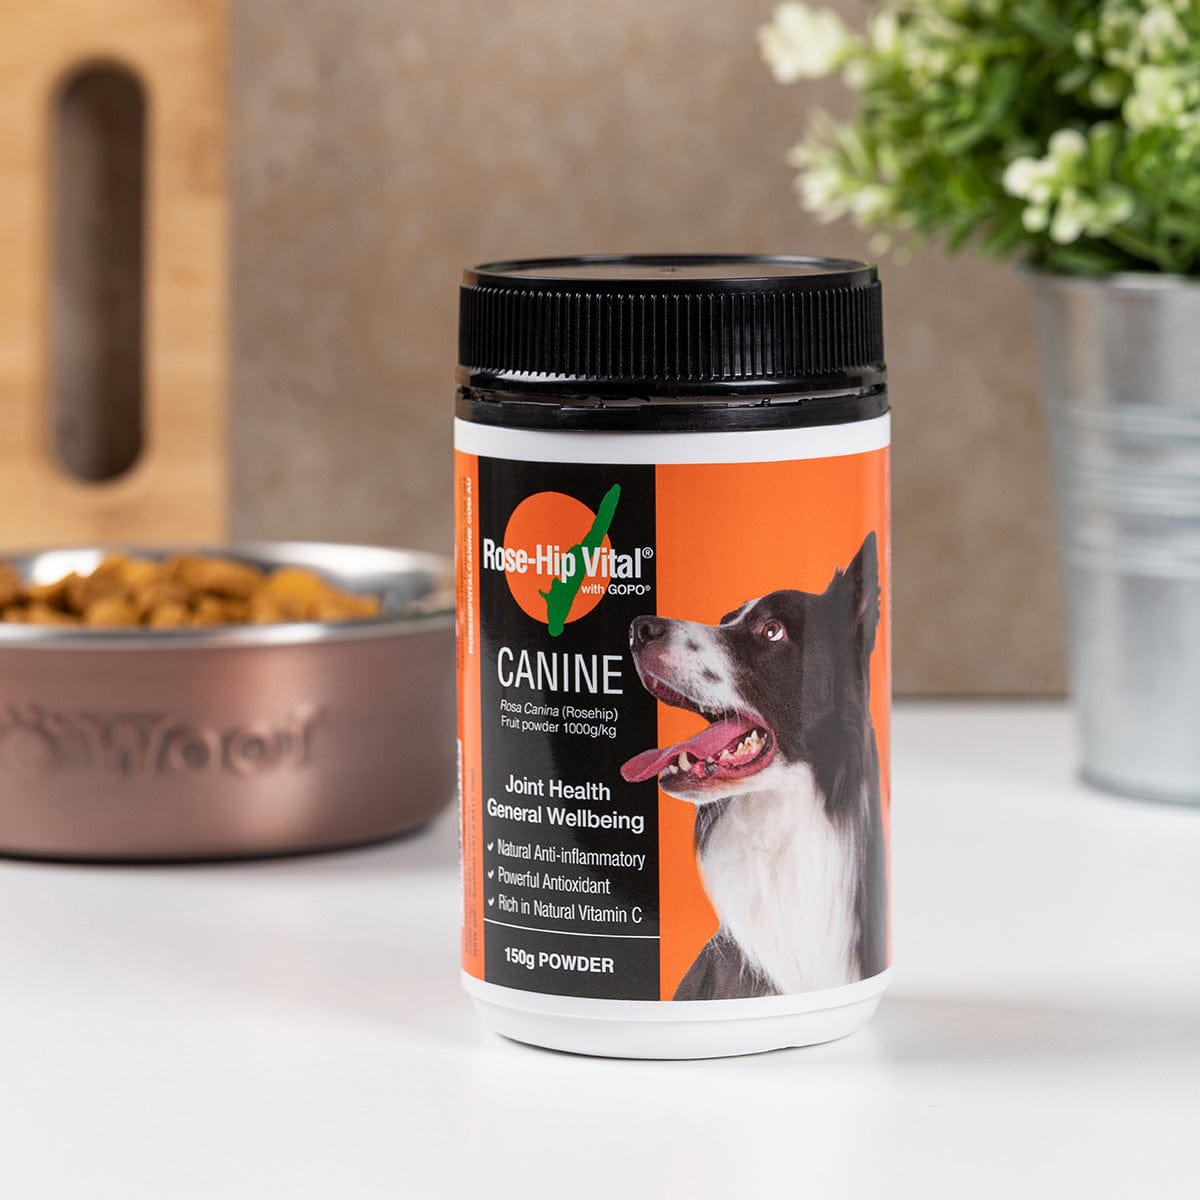 Rose-Hip Vital Canine 150g (5.2oz) | Joint Health &amp; General Wellbeing | For your dog